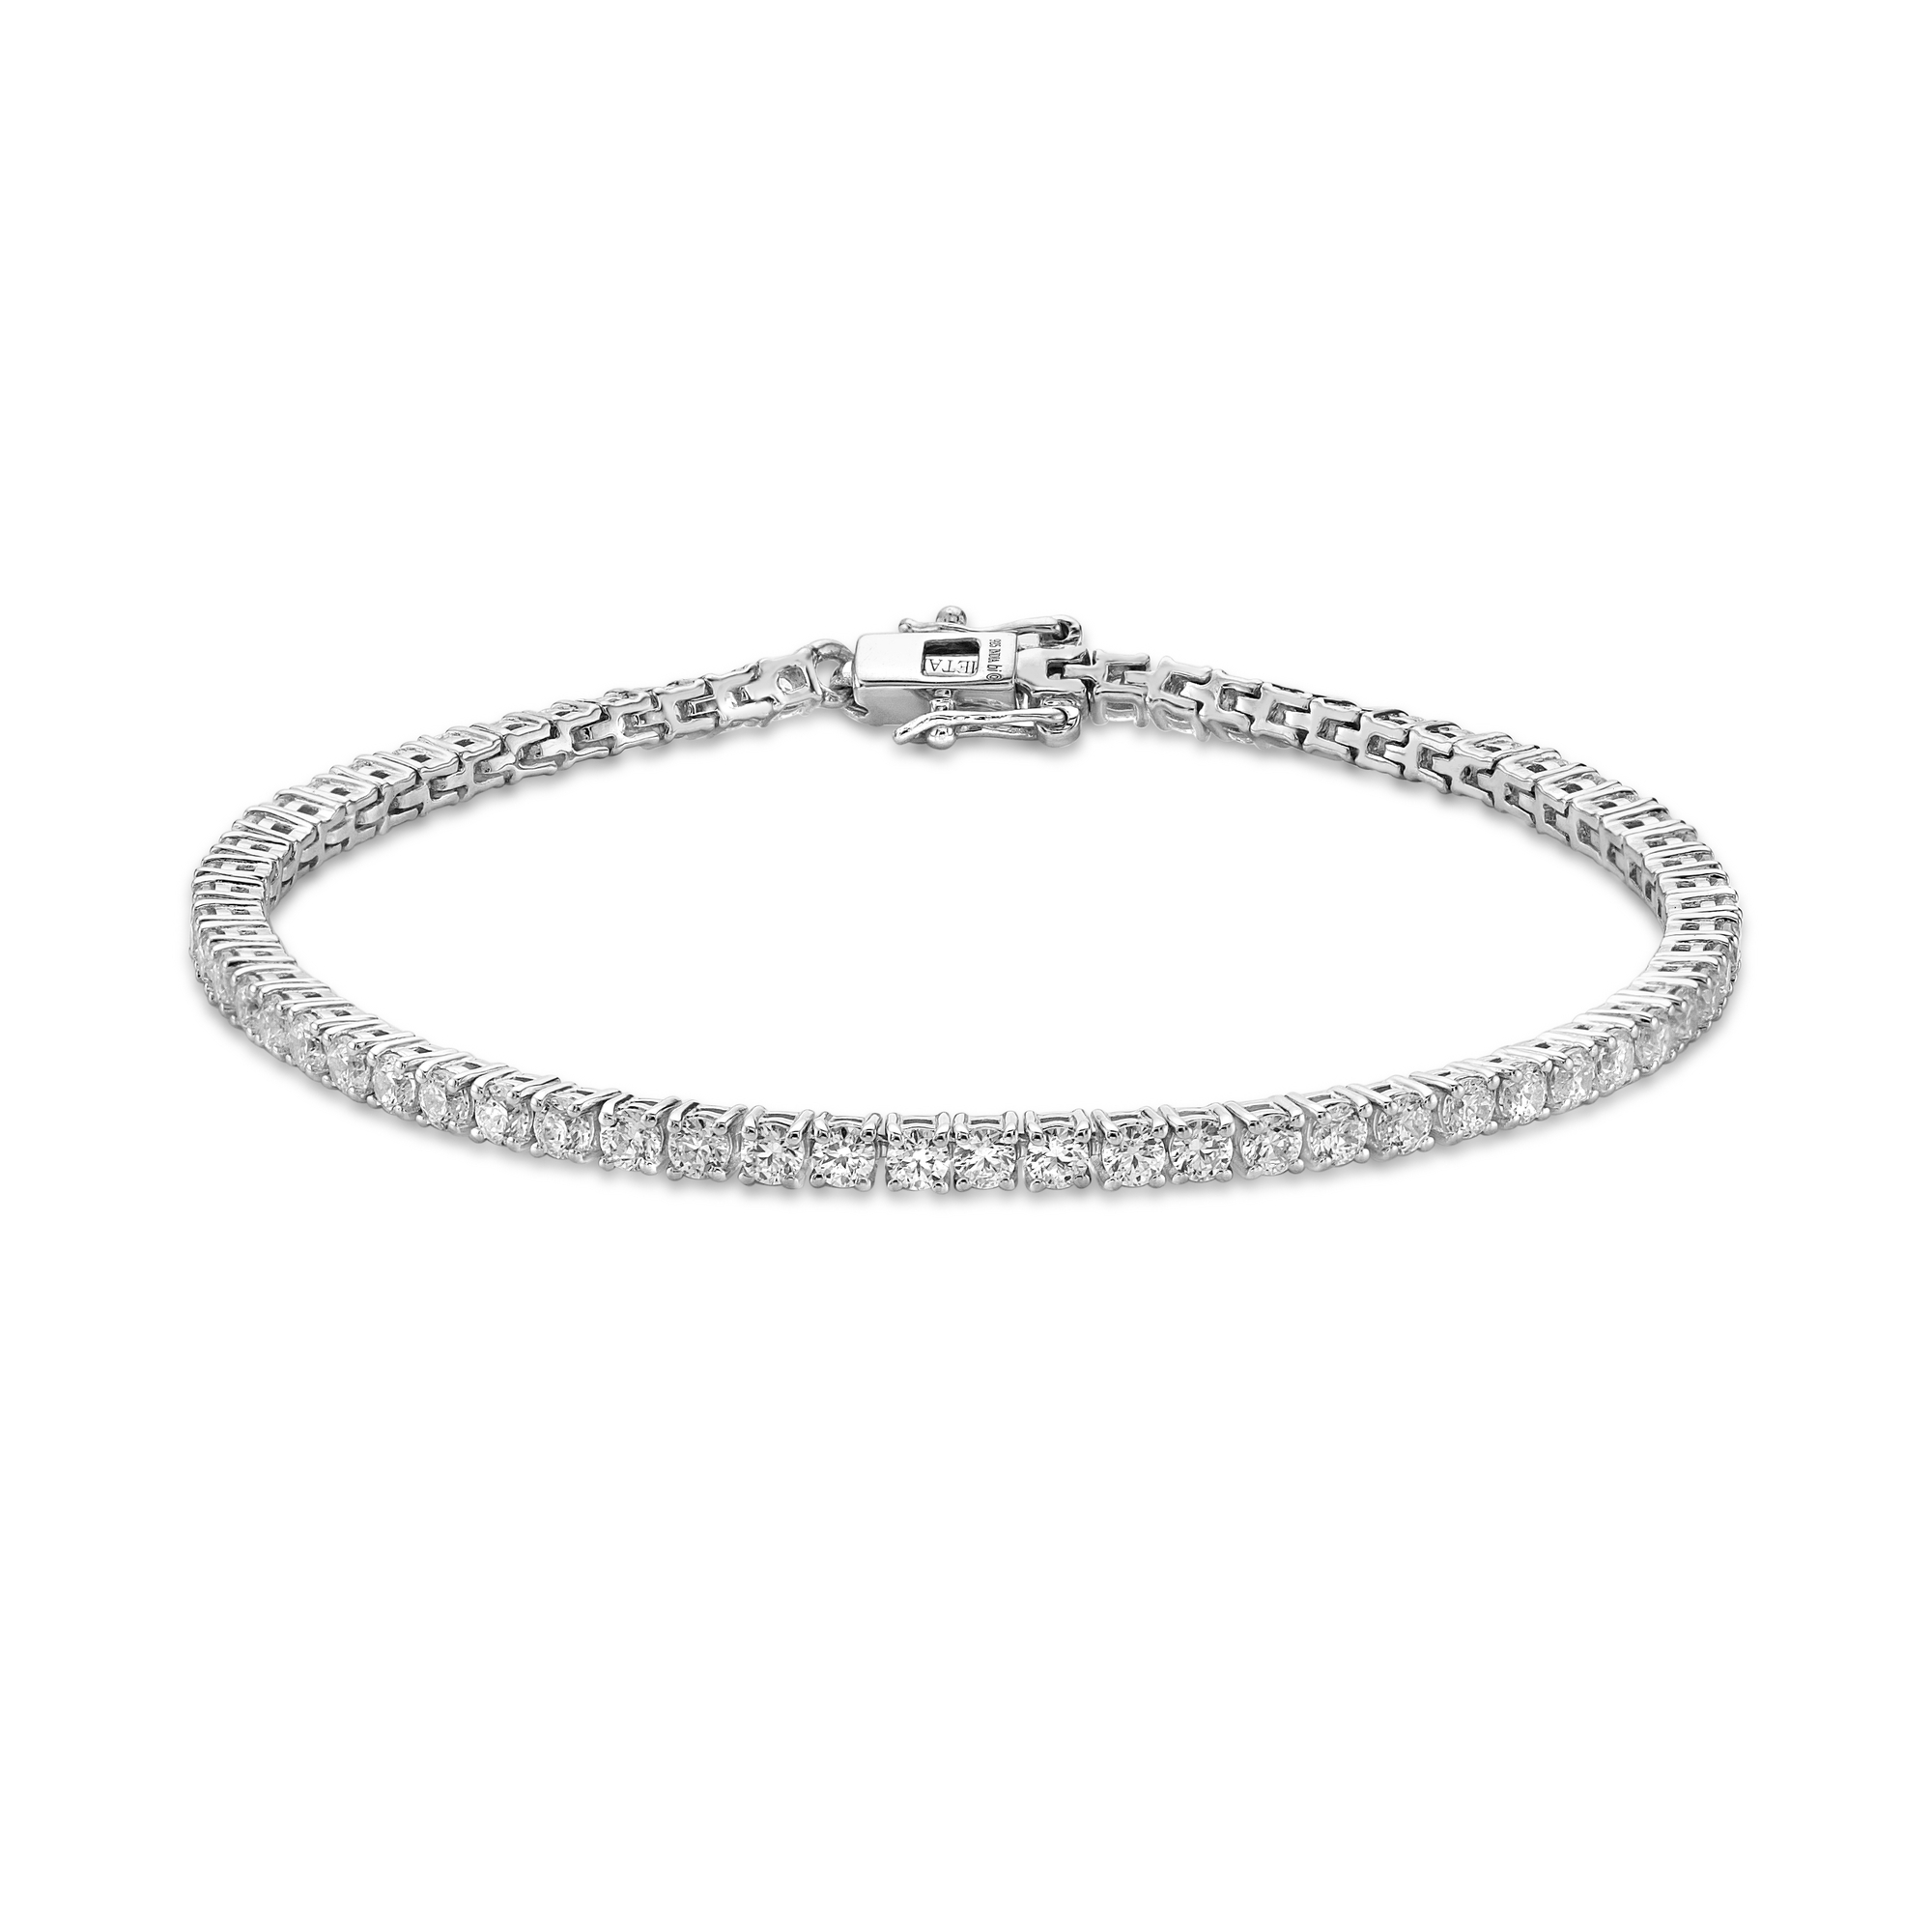 Lavari Jewelers Women's Lab Grown Diamond Tennis Bracelet with Box with Tongue and Safety Clasp, 925 Sterling Silver, 4 Carat, 7.25 Inches Long